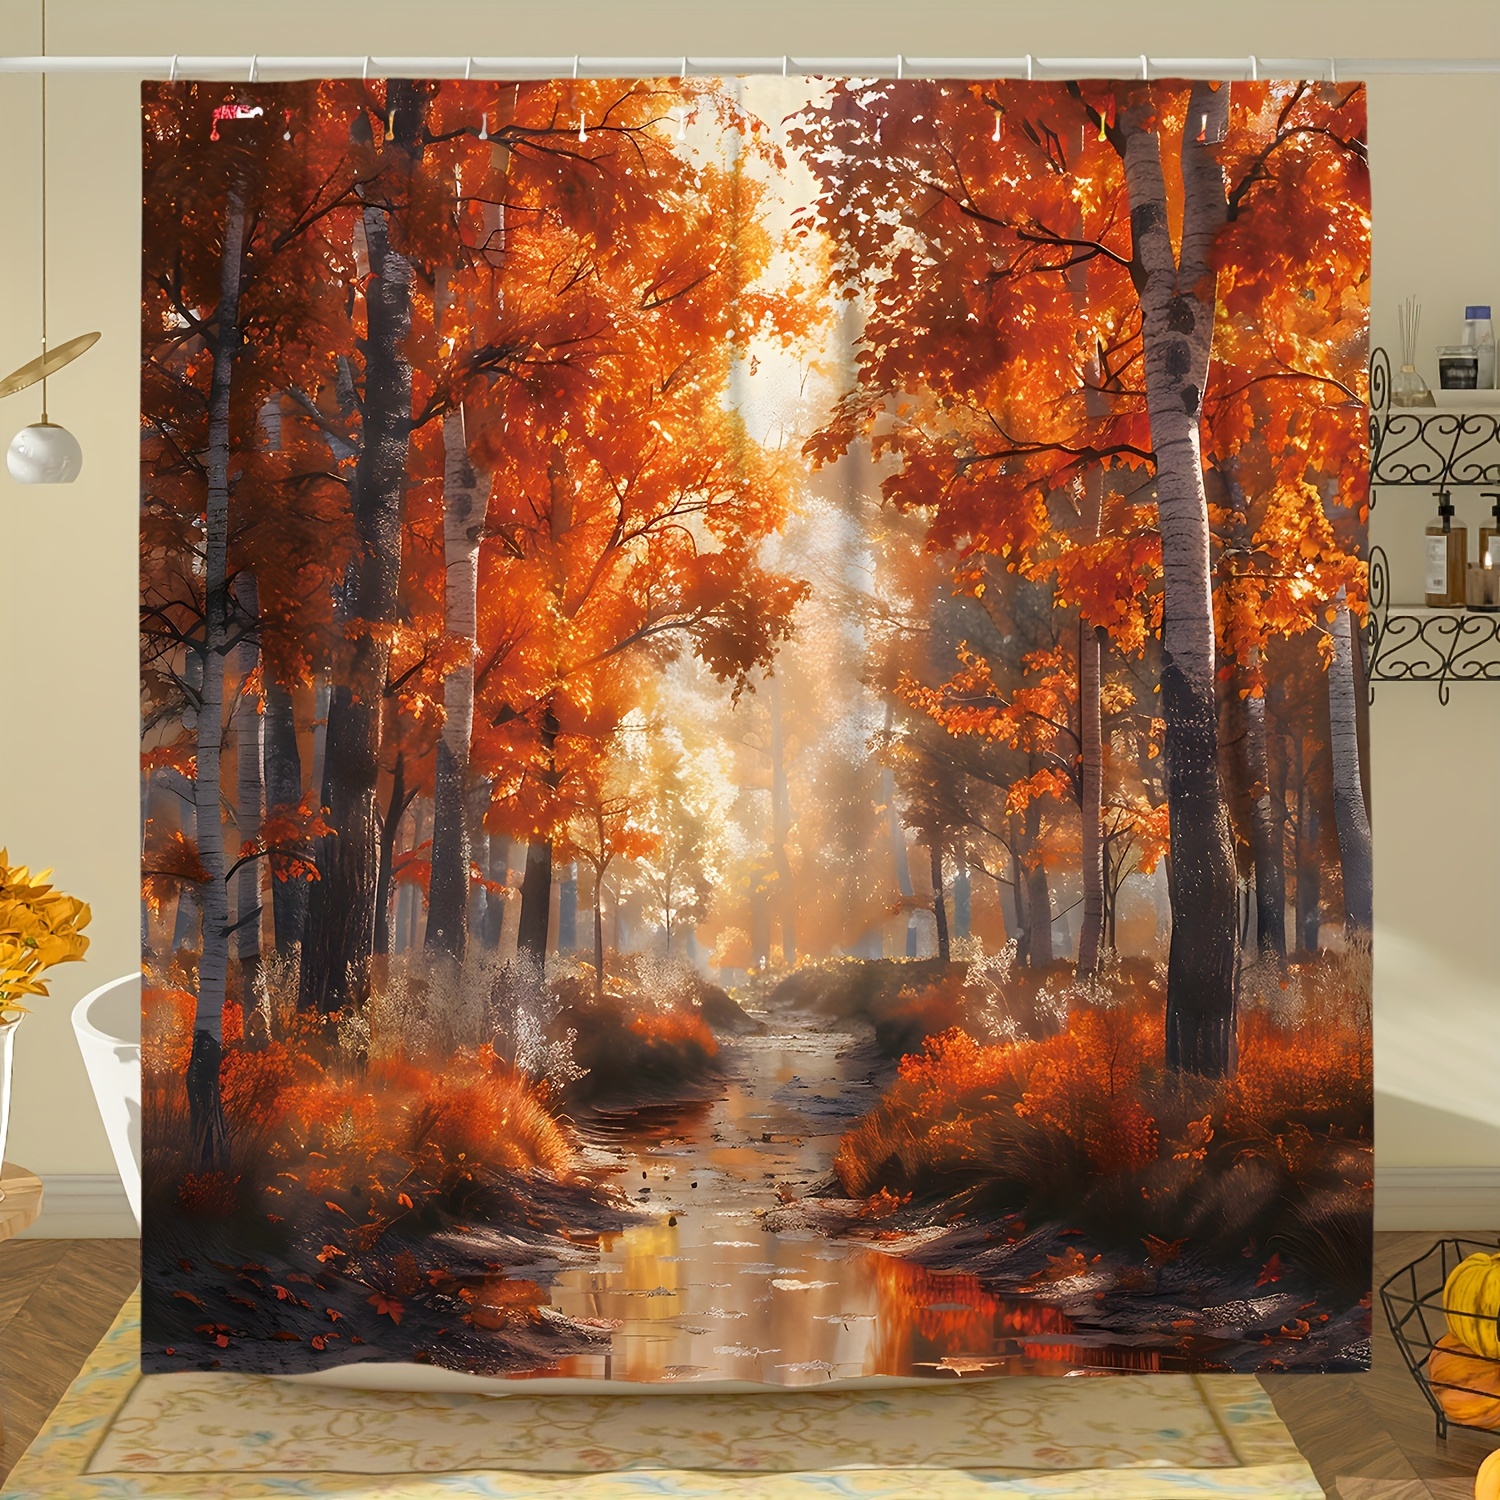 

Autumn Splendor Shower Curtain - Waterproof Polyester, Maple Leaf & Forest Design, Machine Washable With 12 Hooks, 71x71 Inches - Perfect For Fall Bathroom Decor